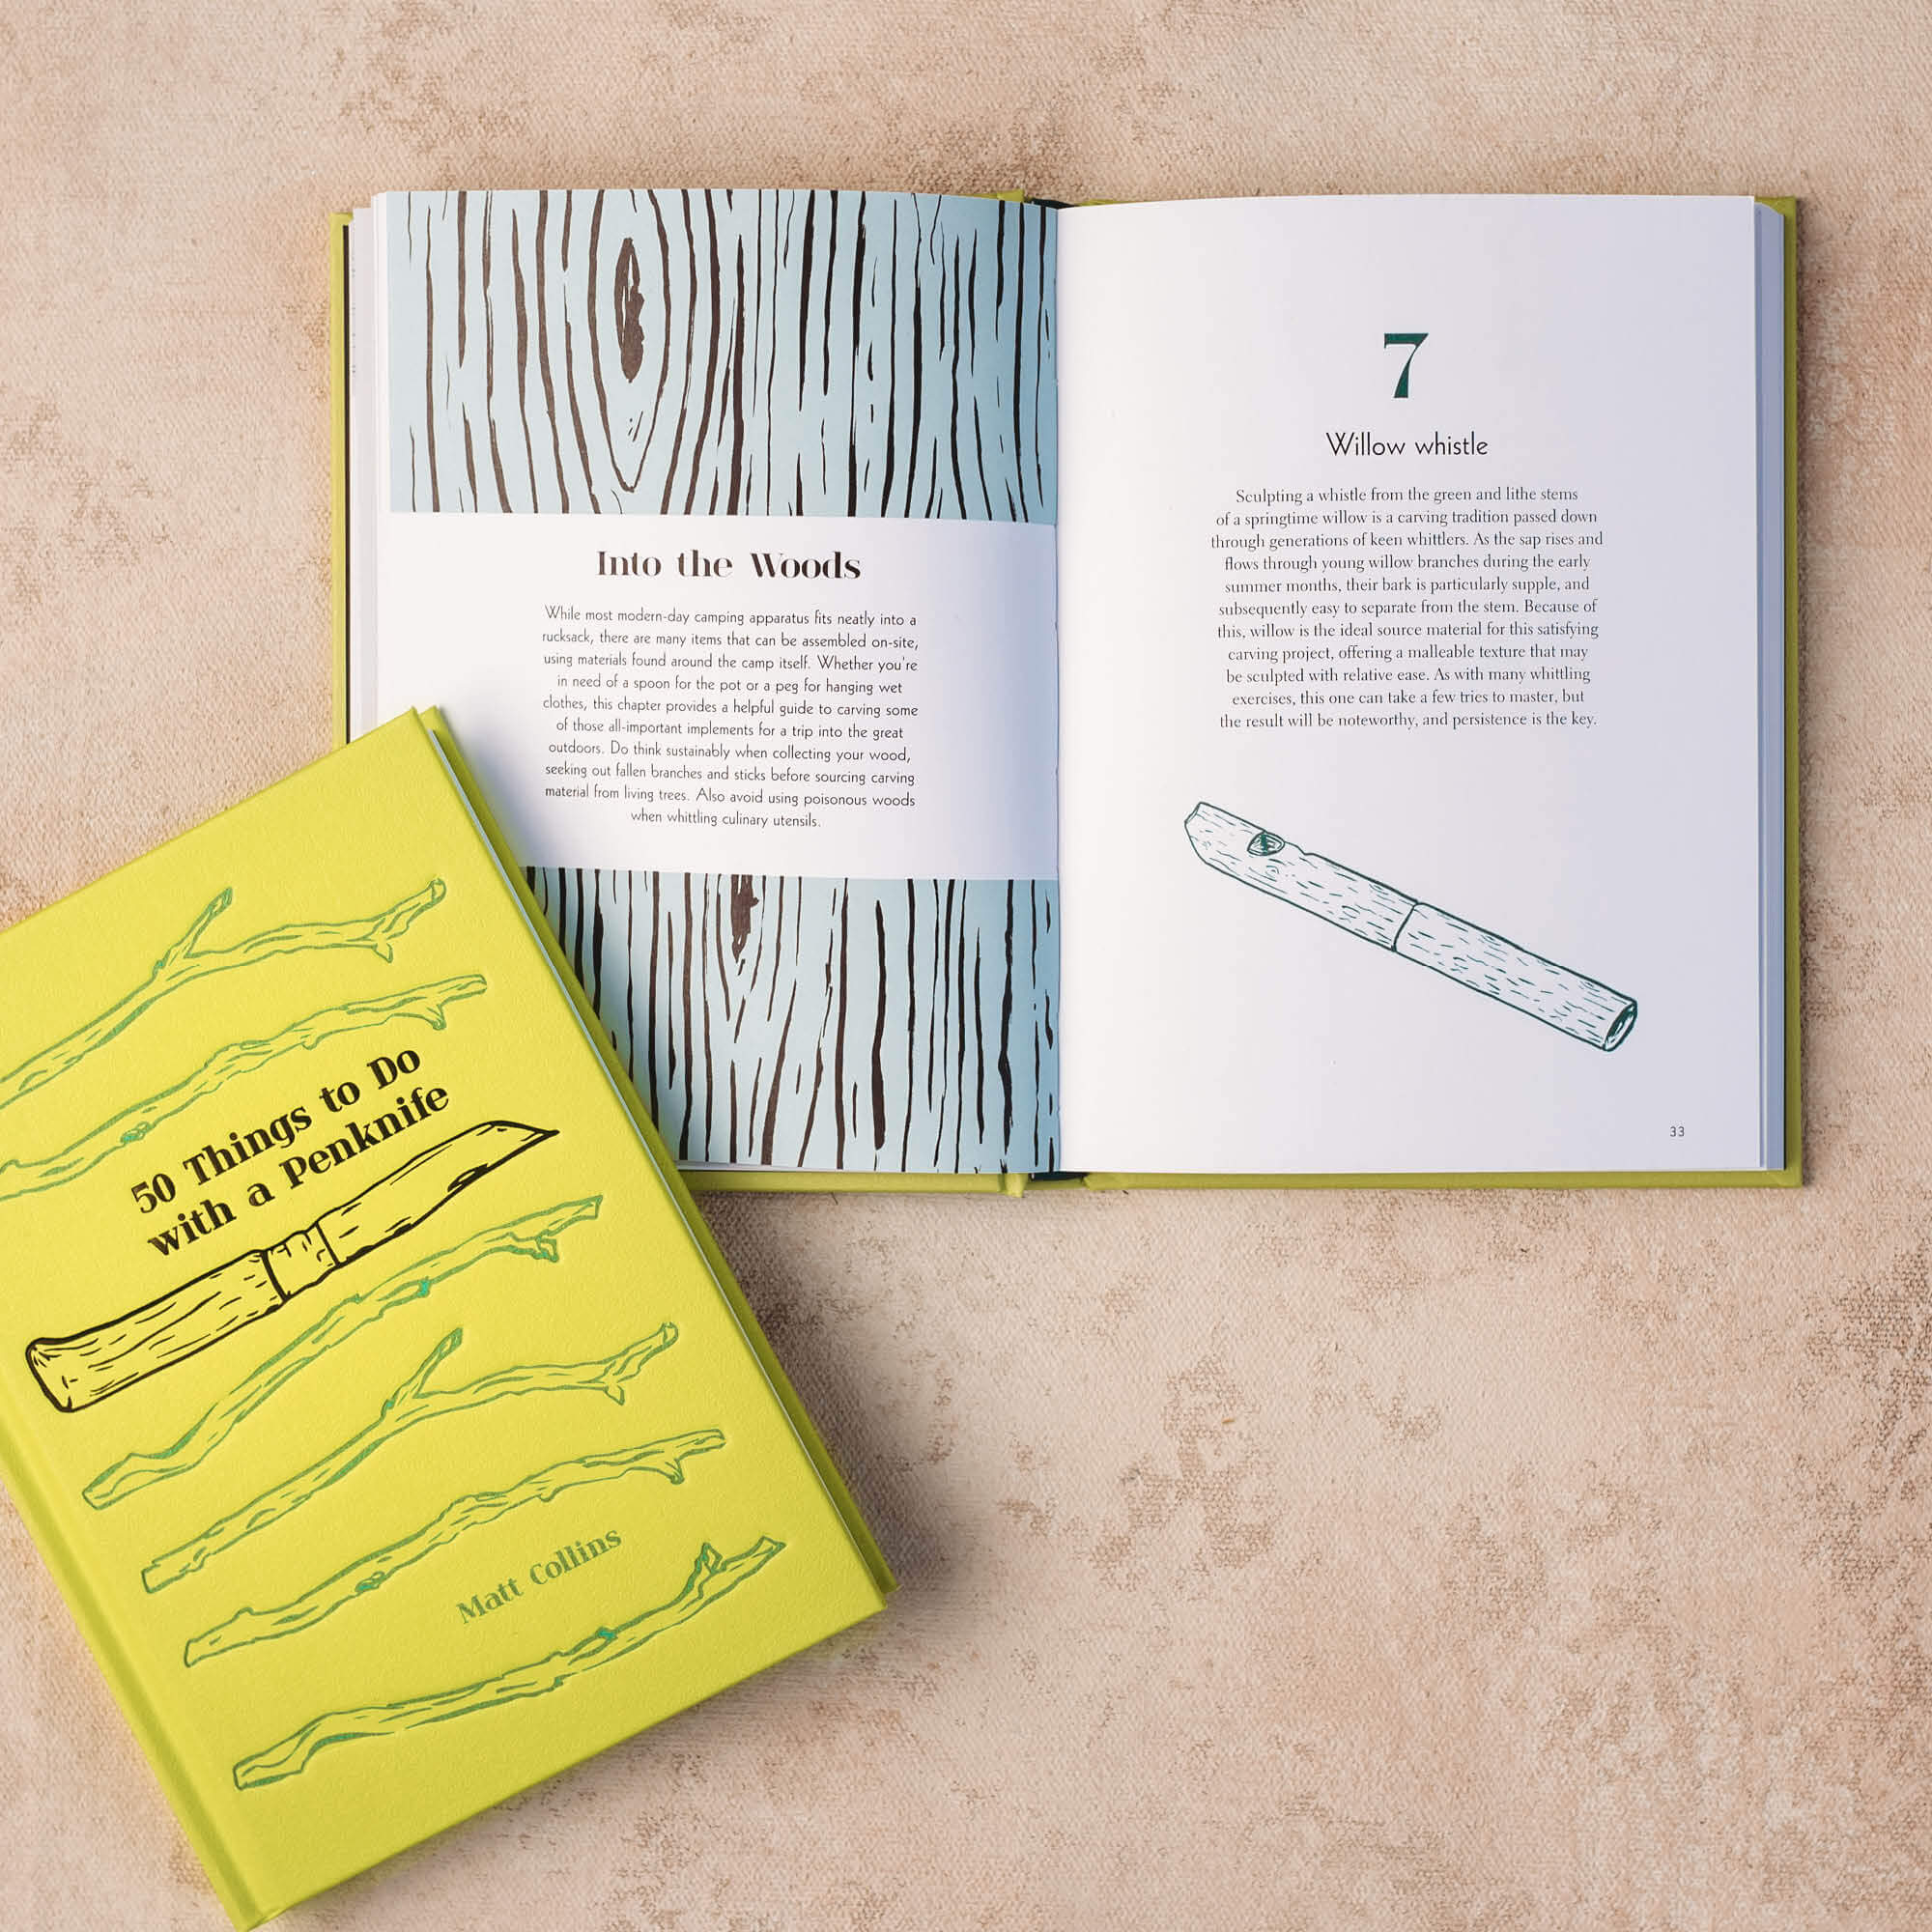 How to make a Willow Whistle. Pages from 50 things to do with a penknife book wood whittling book for kids wood working projects from Your Wild Books